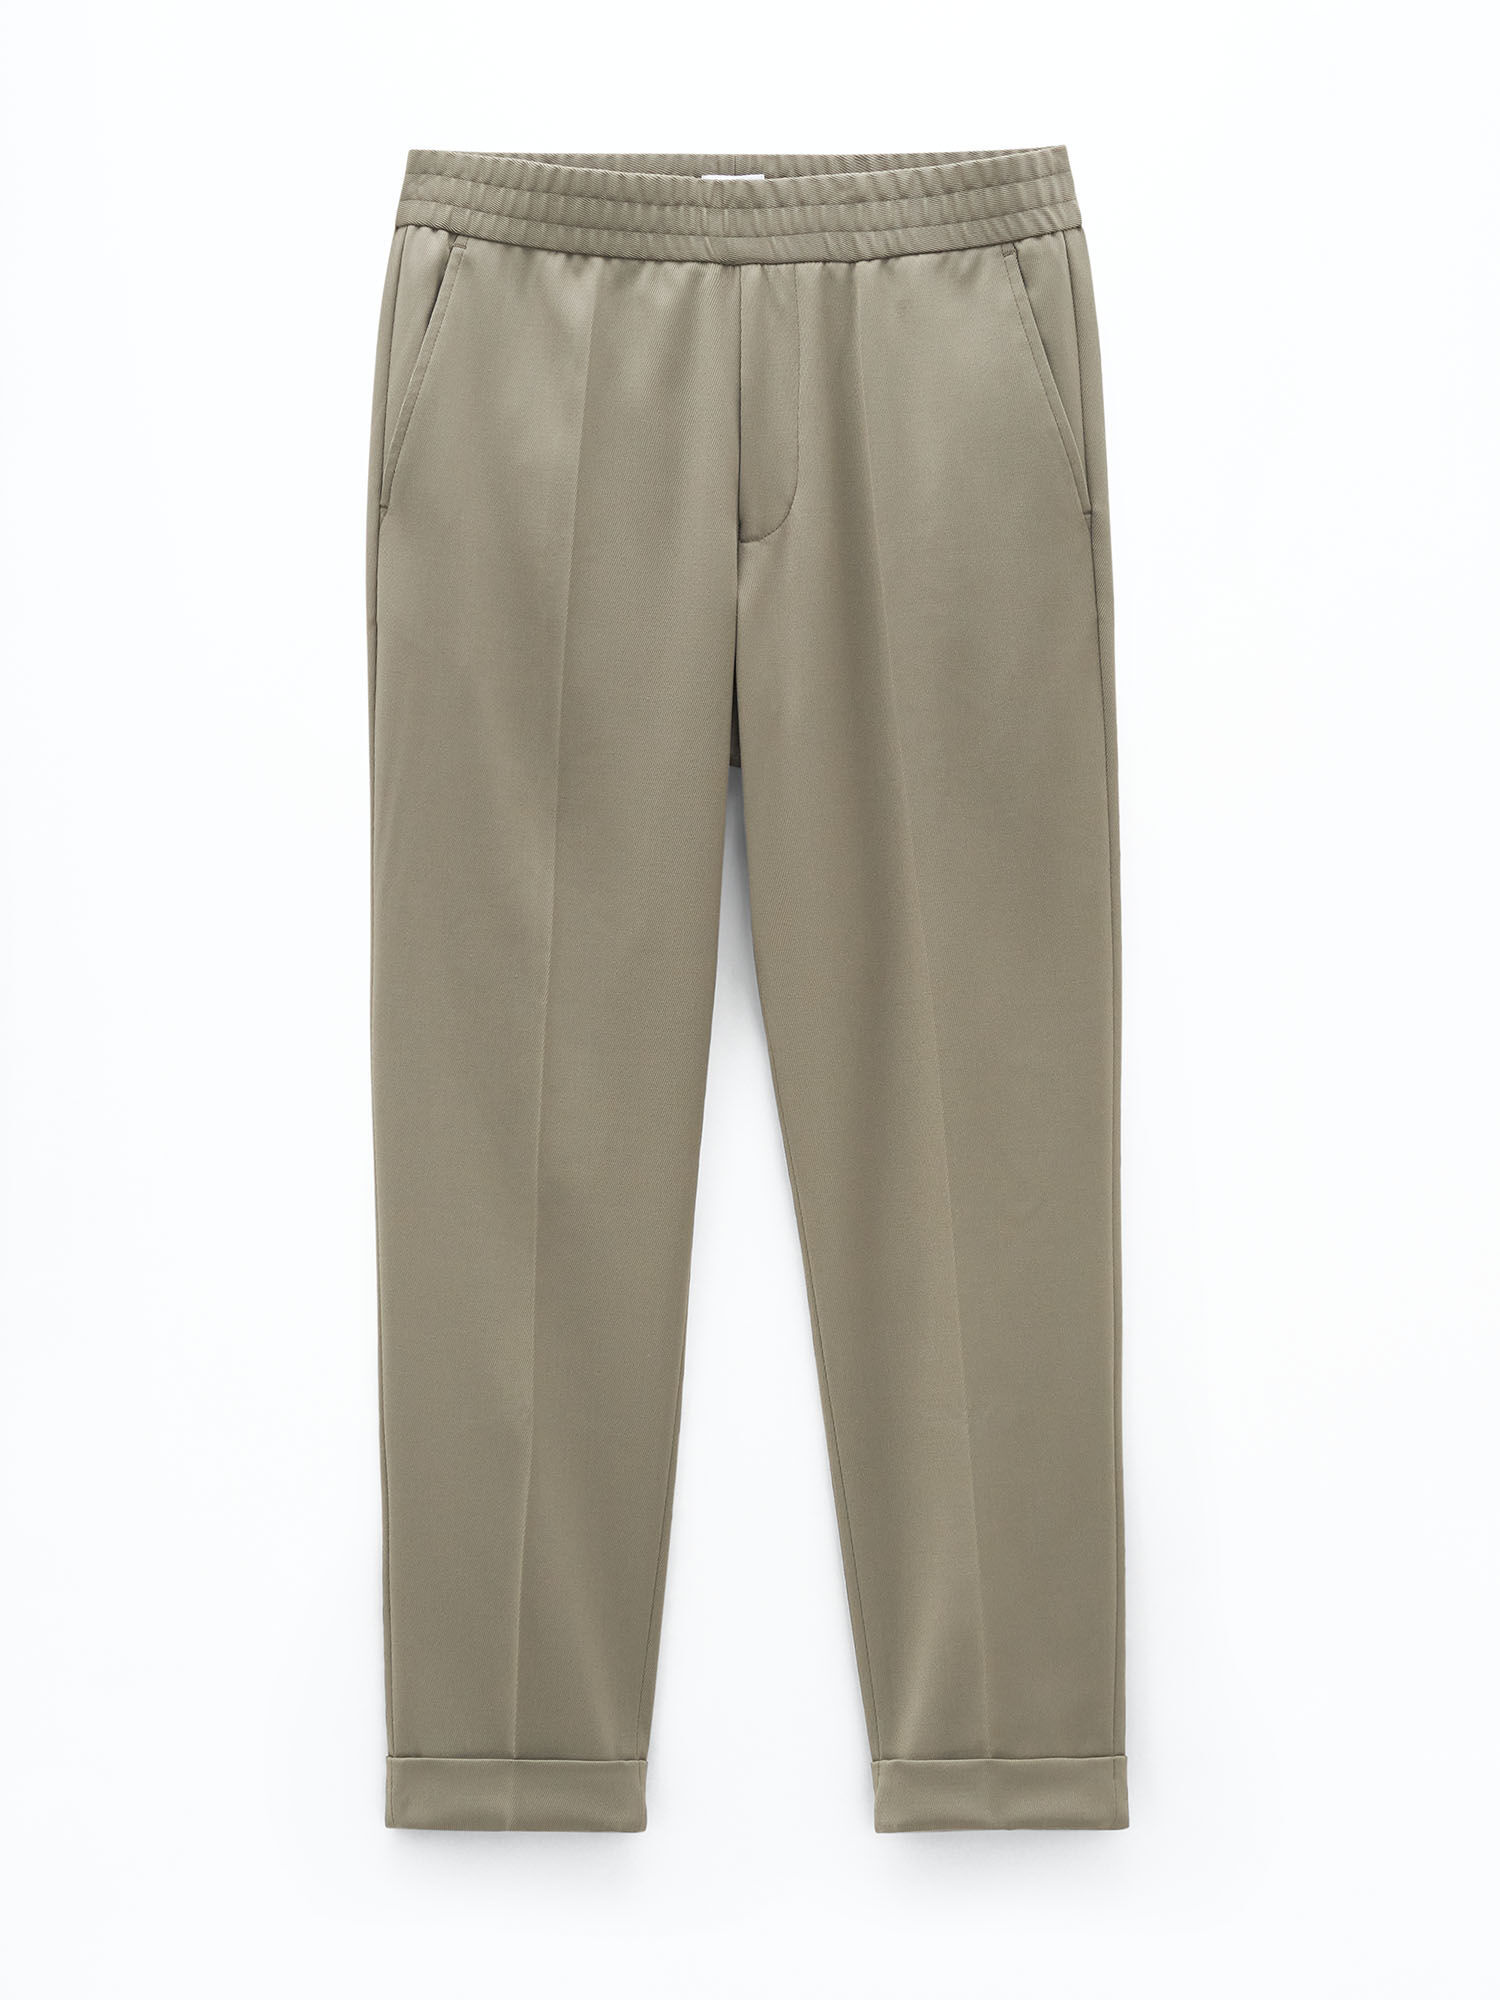 Buy Beige Cropped Trousers Online - W for Woman